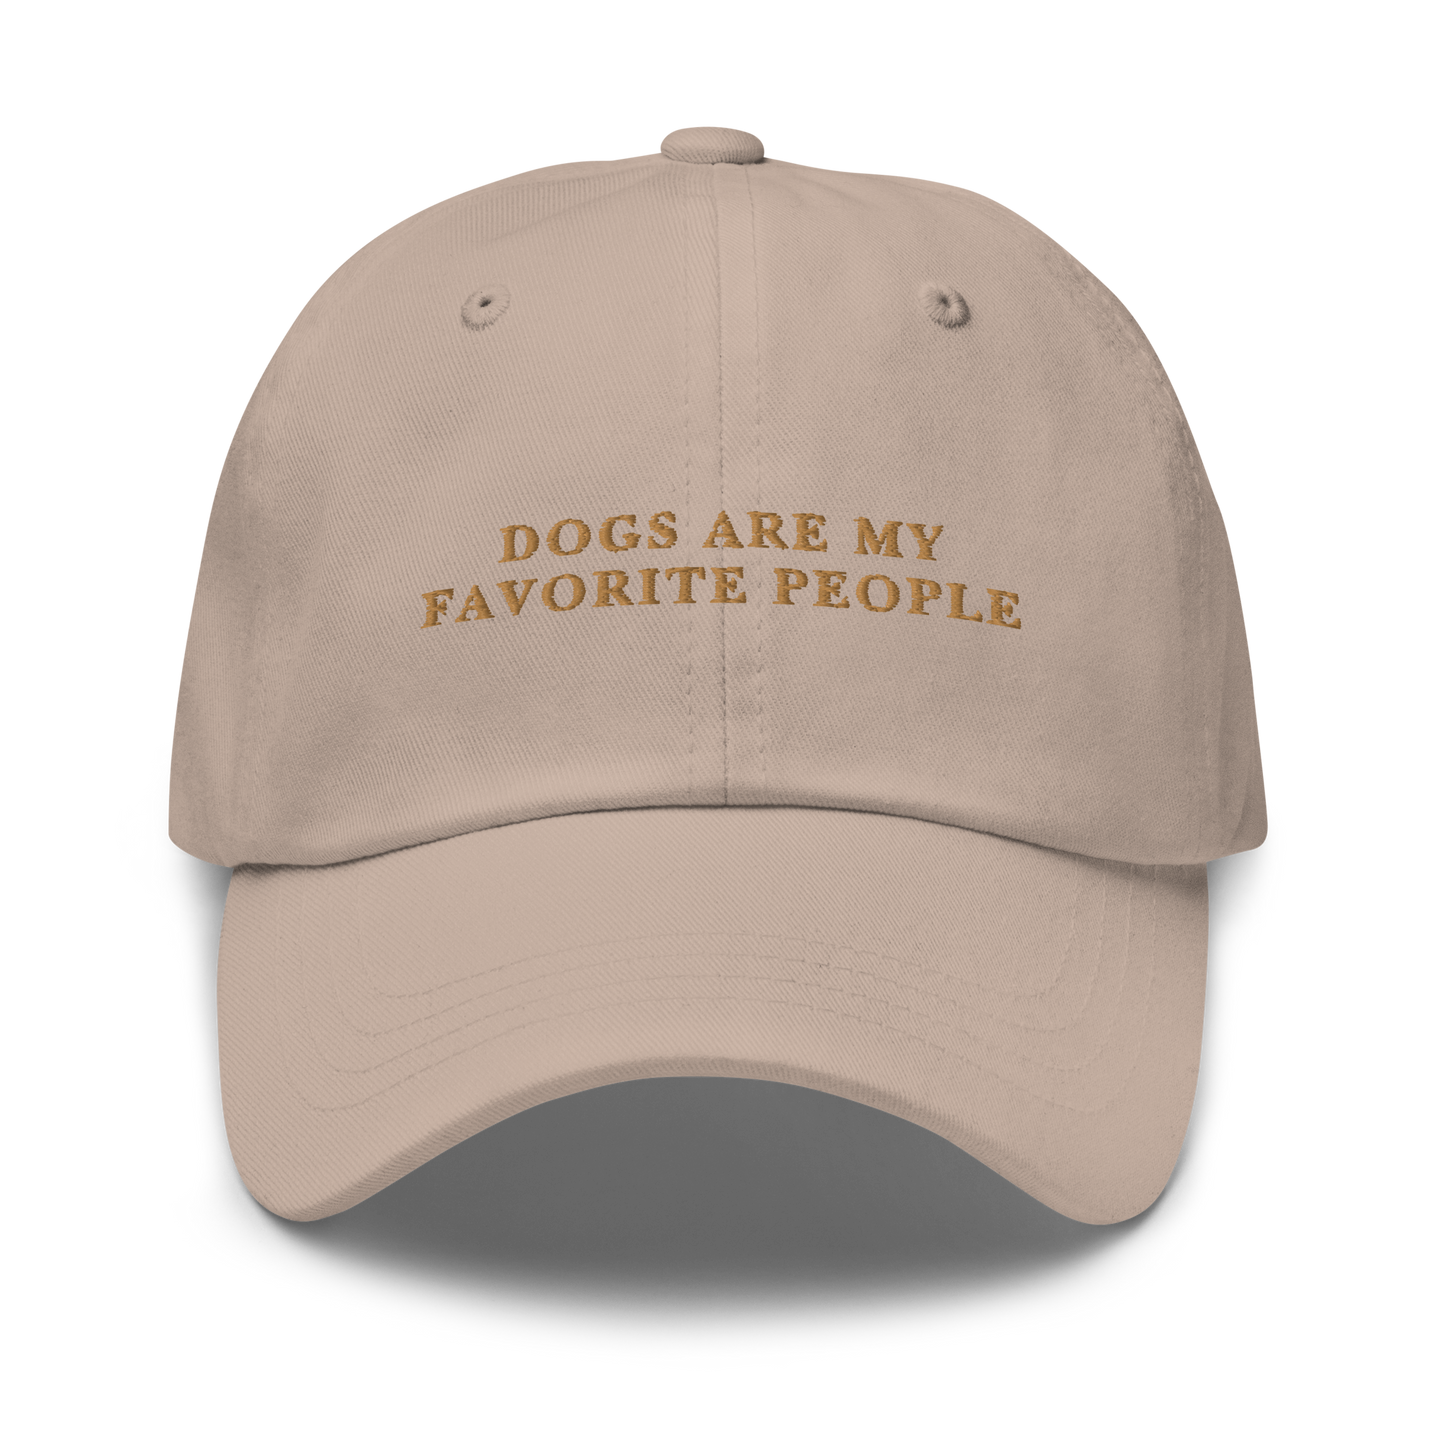 Dogs are my Favourite People Embroidered Dad Hat